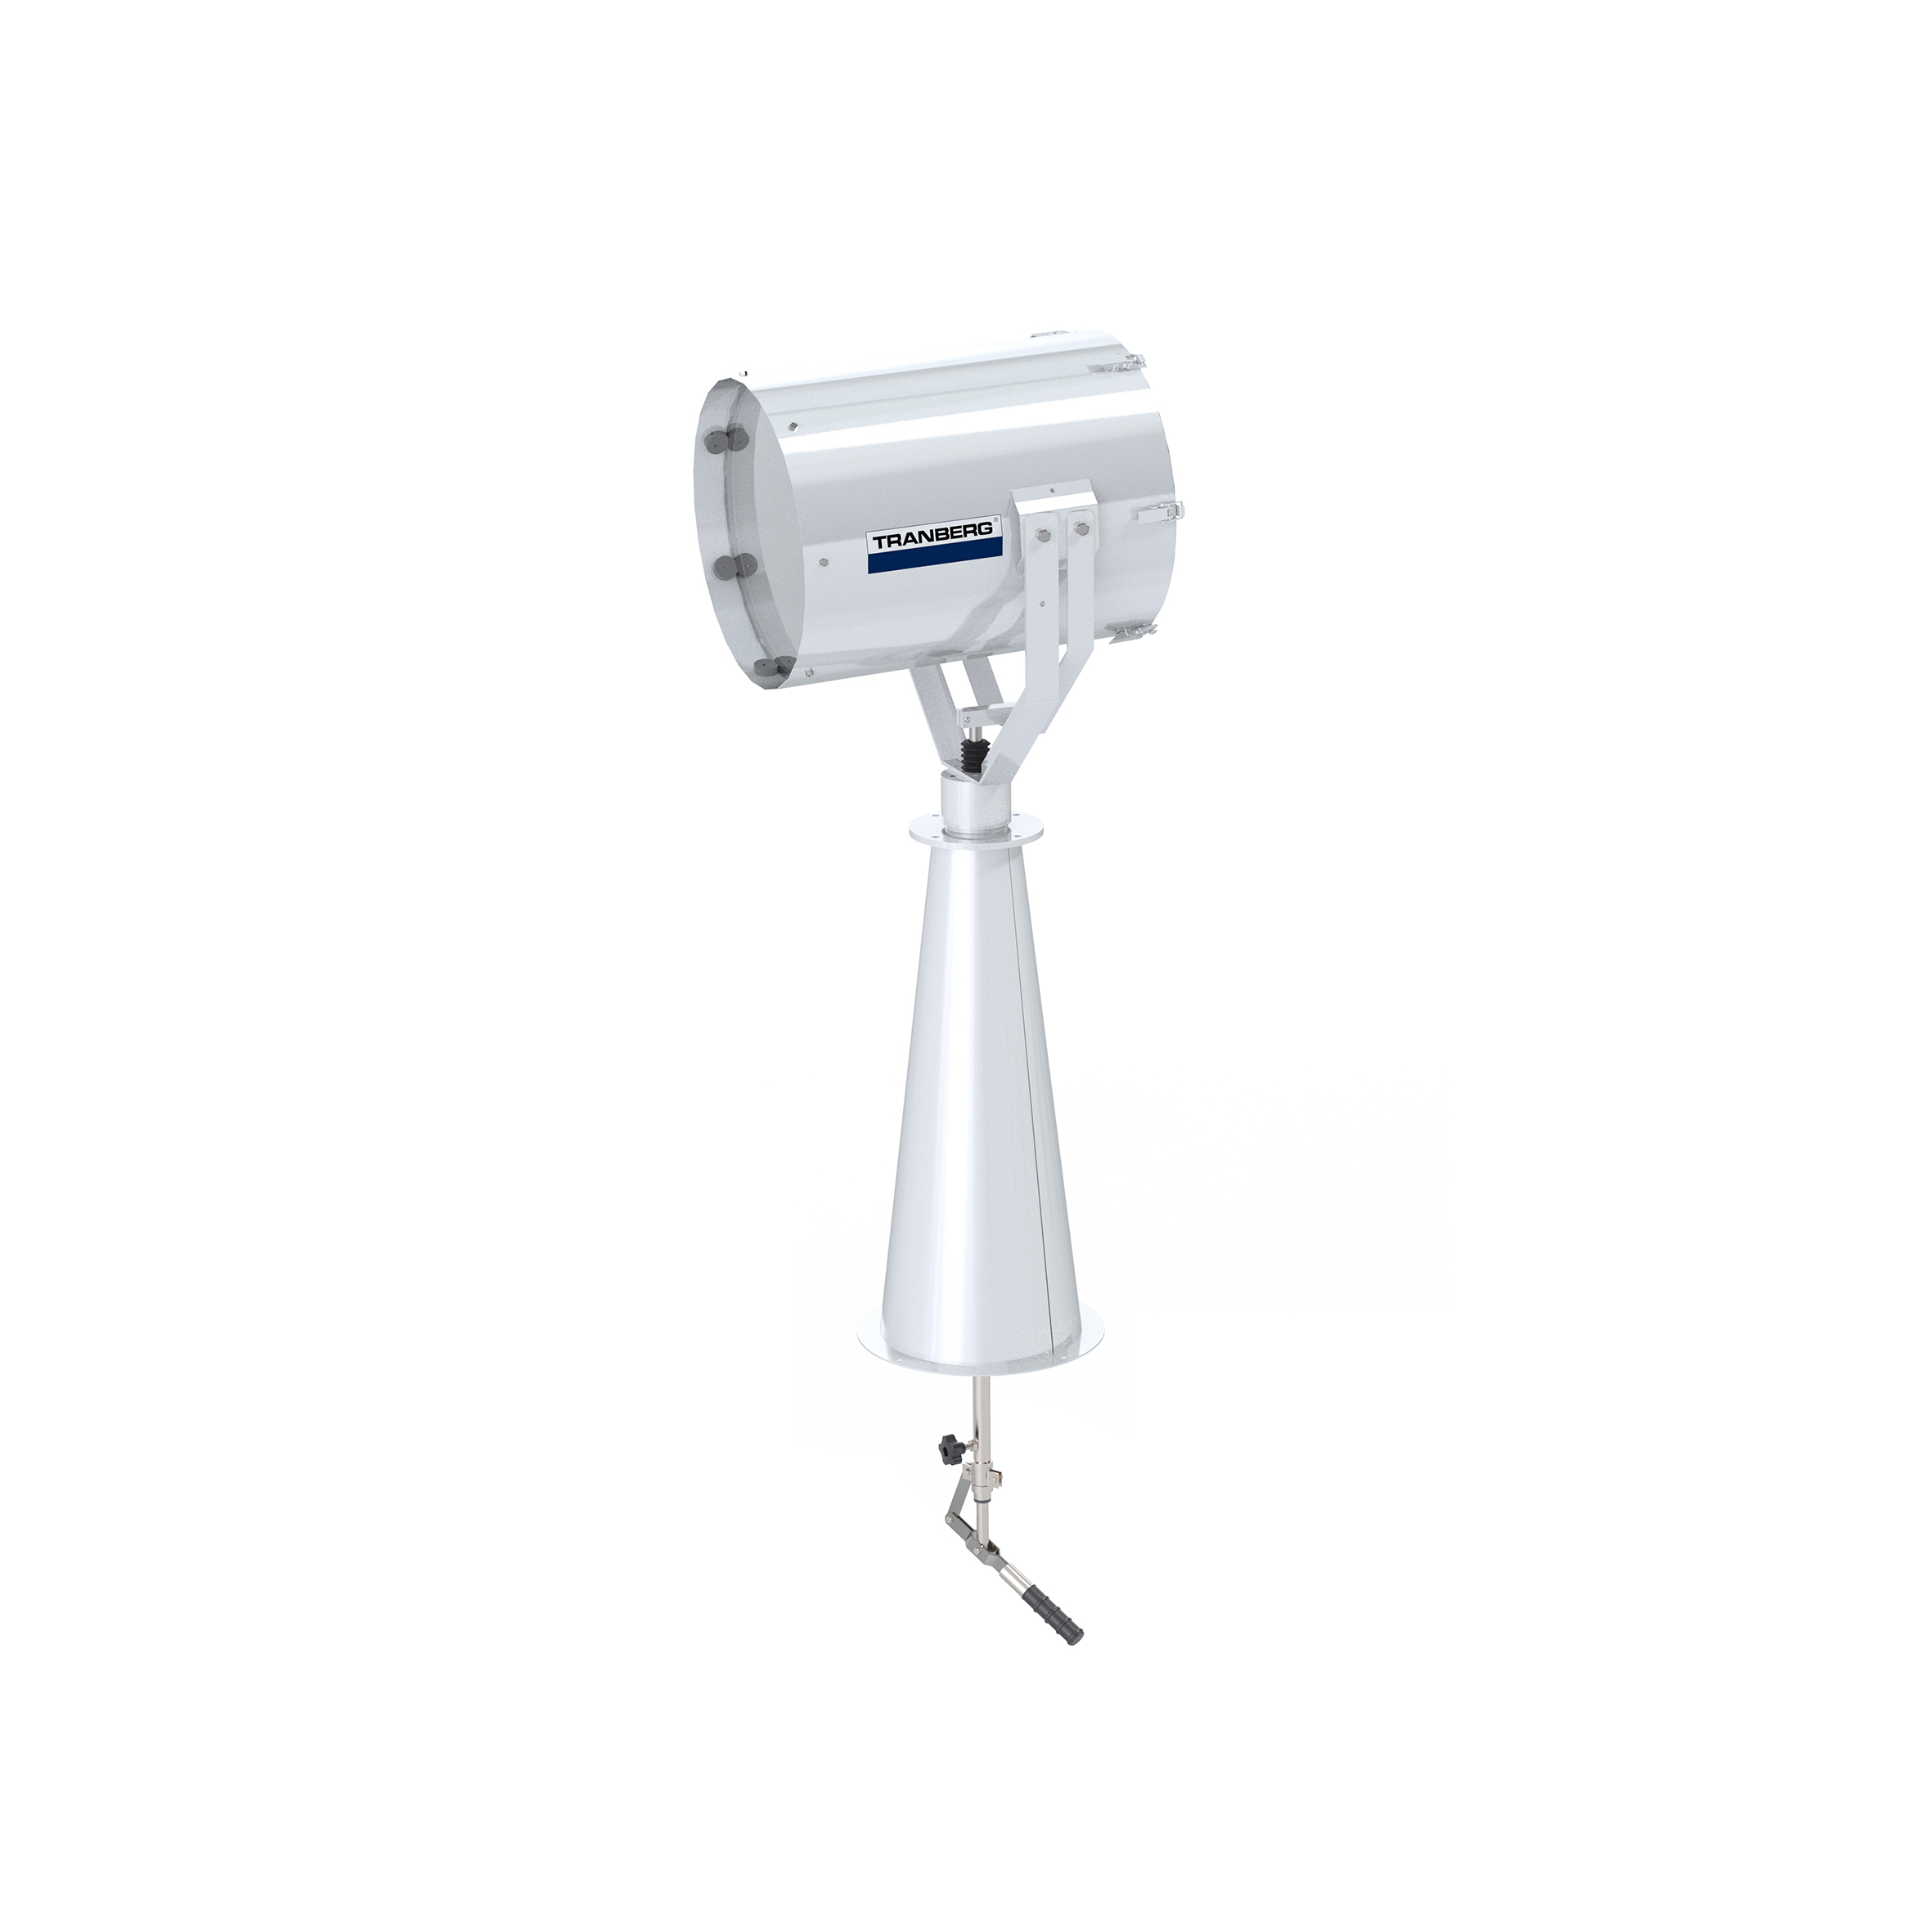 TEF 2630 Searchlight: Xenon 1000W bulb incl, 230V, Bridge Controlled, Stainless Steel, W/800 mm pede photo